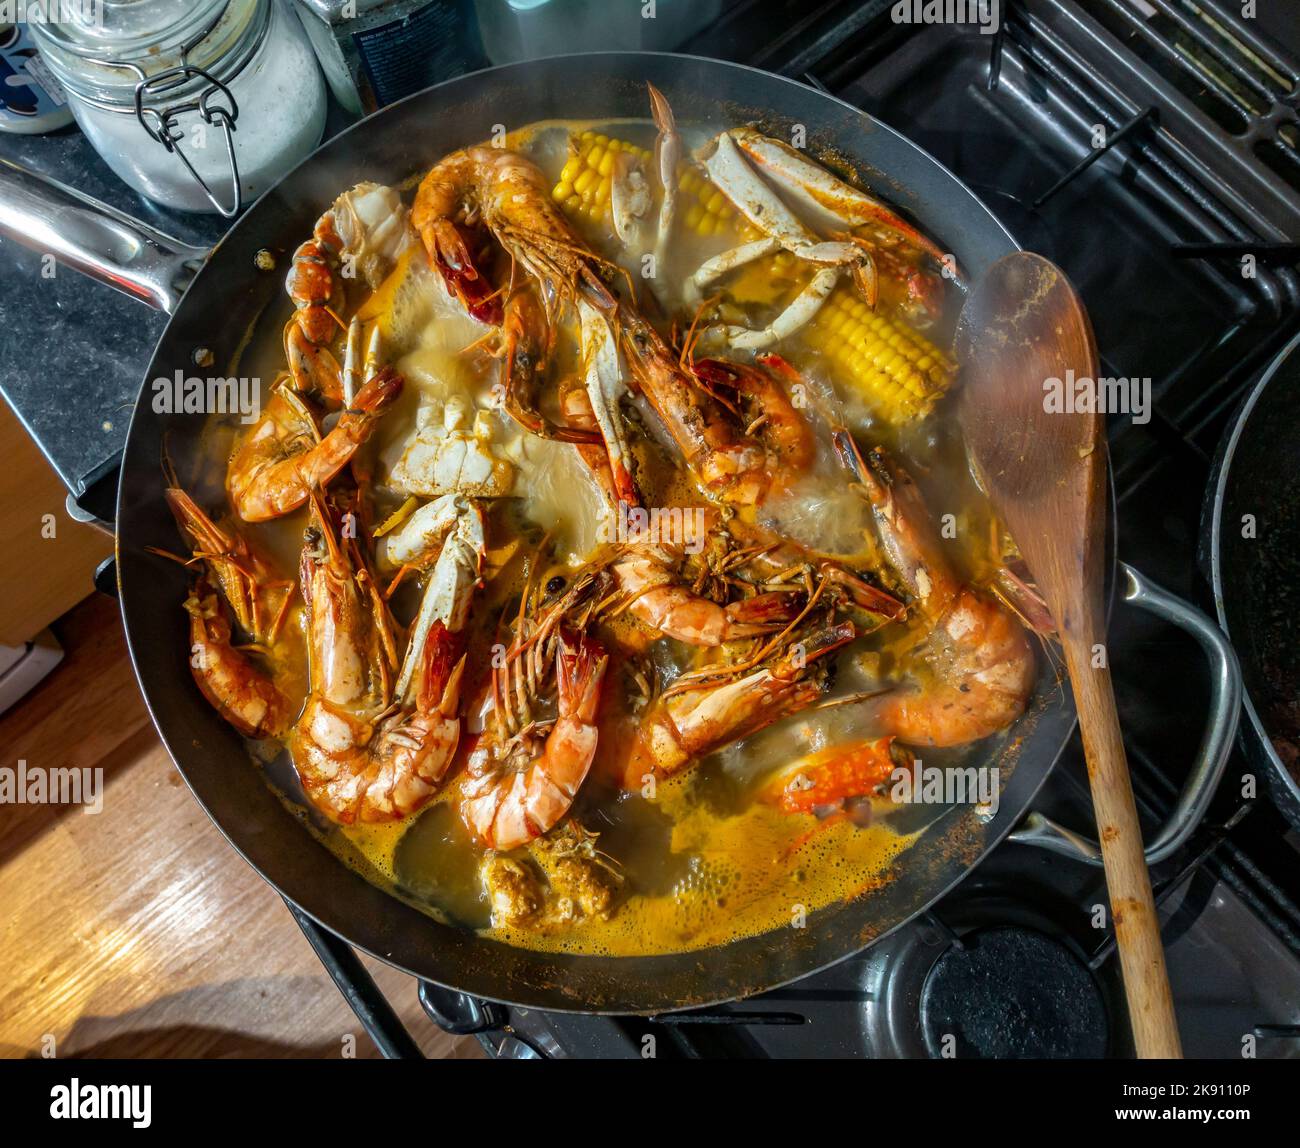 Seafood boil with crabs, prawns and corn on the cob boiling in a wok on a hob in a home kitchen. Stock Photo